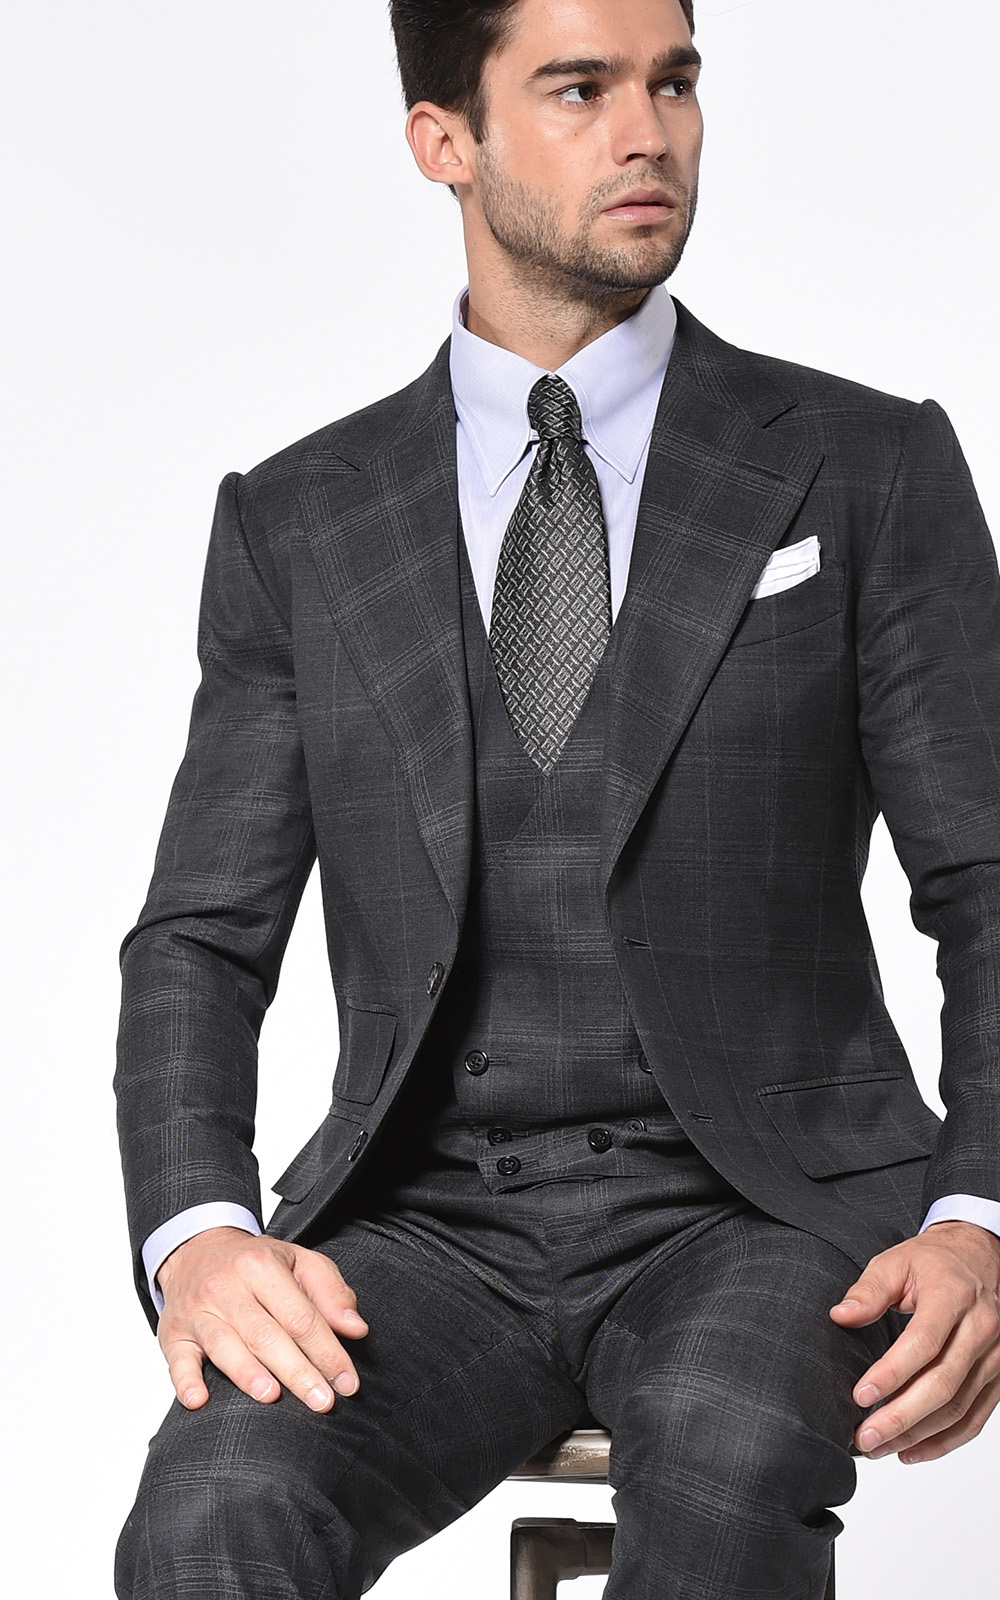 Men's Charcoal Gray Suit Article - How to wear a custom bespoke